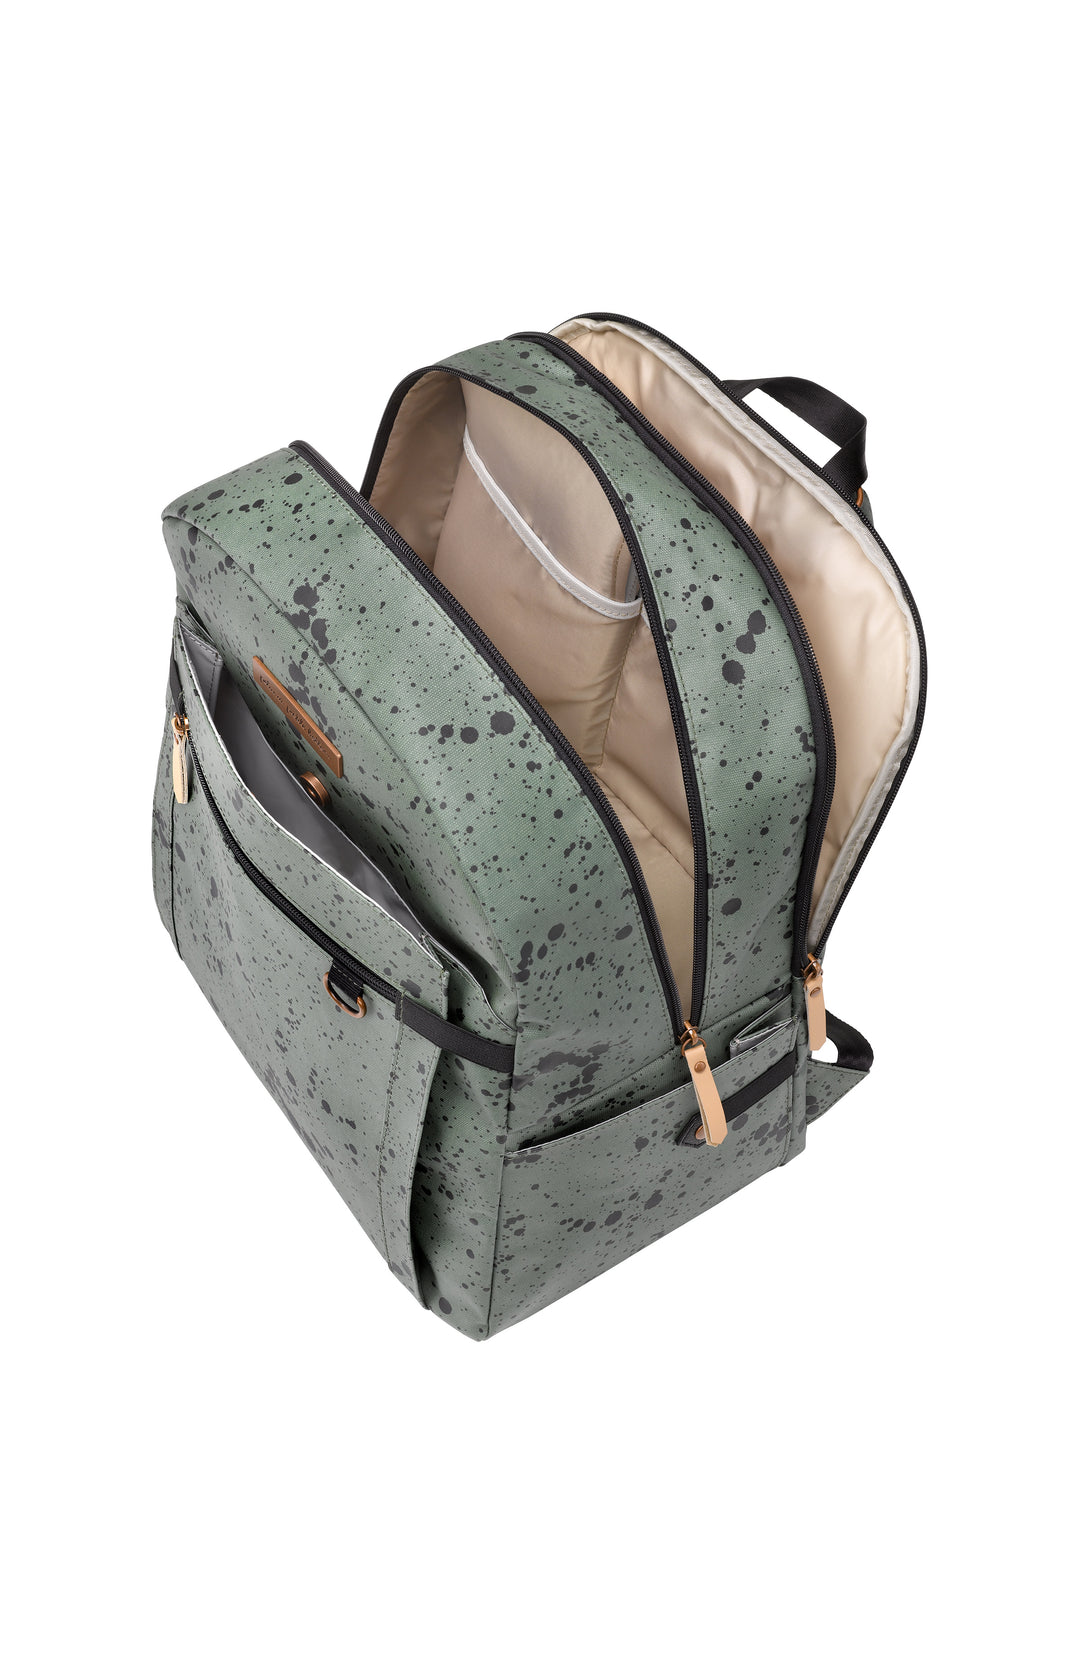 2-in-1 Provisions Backpack - Olive Ink Blot